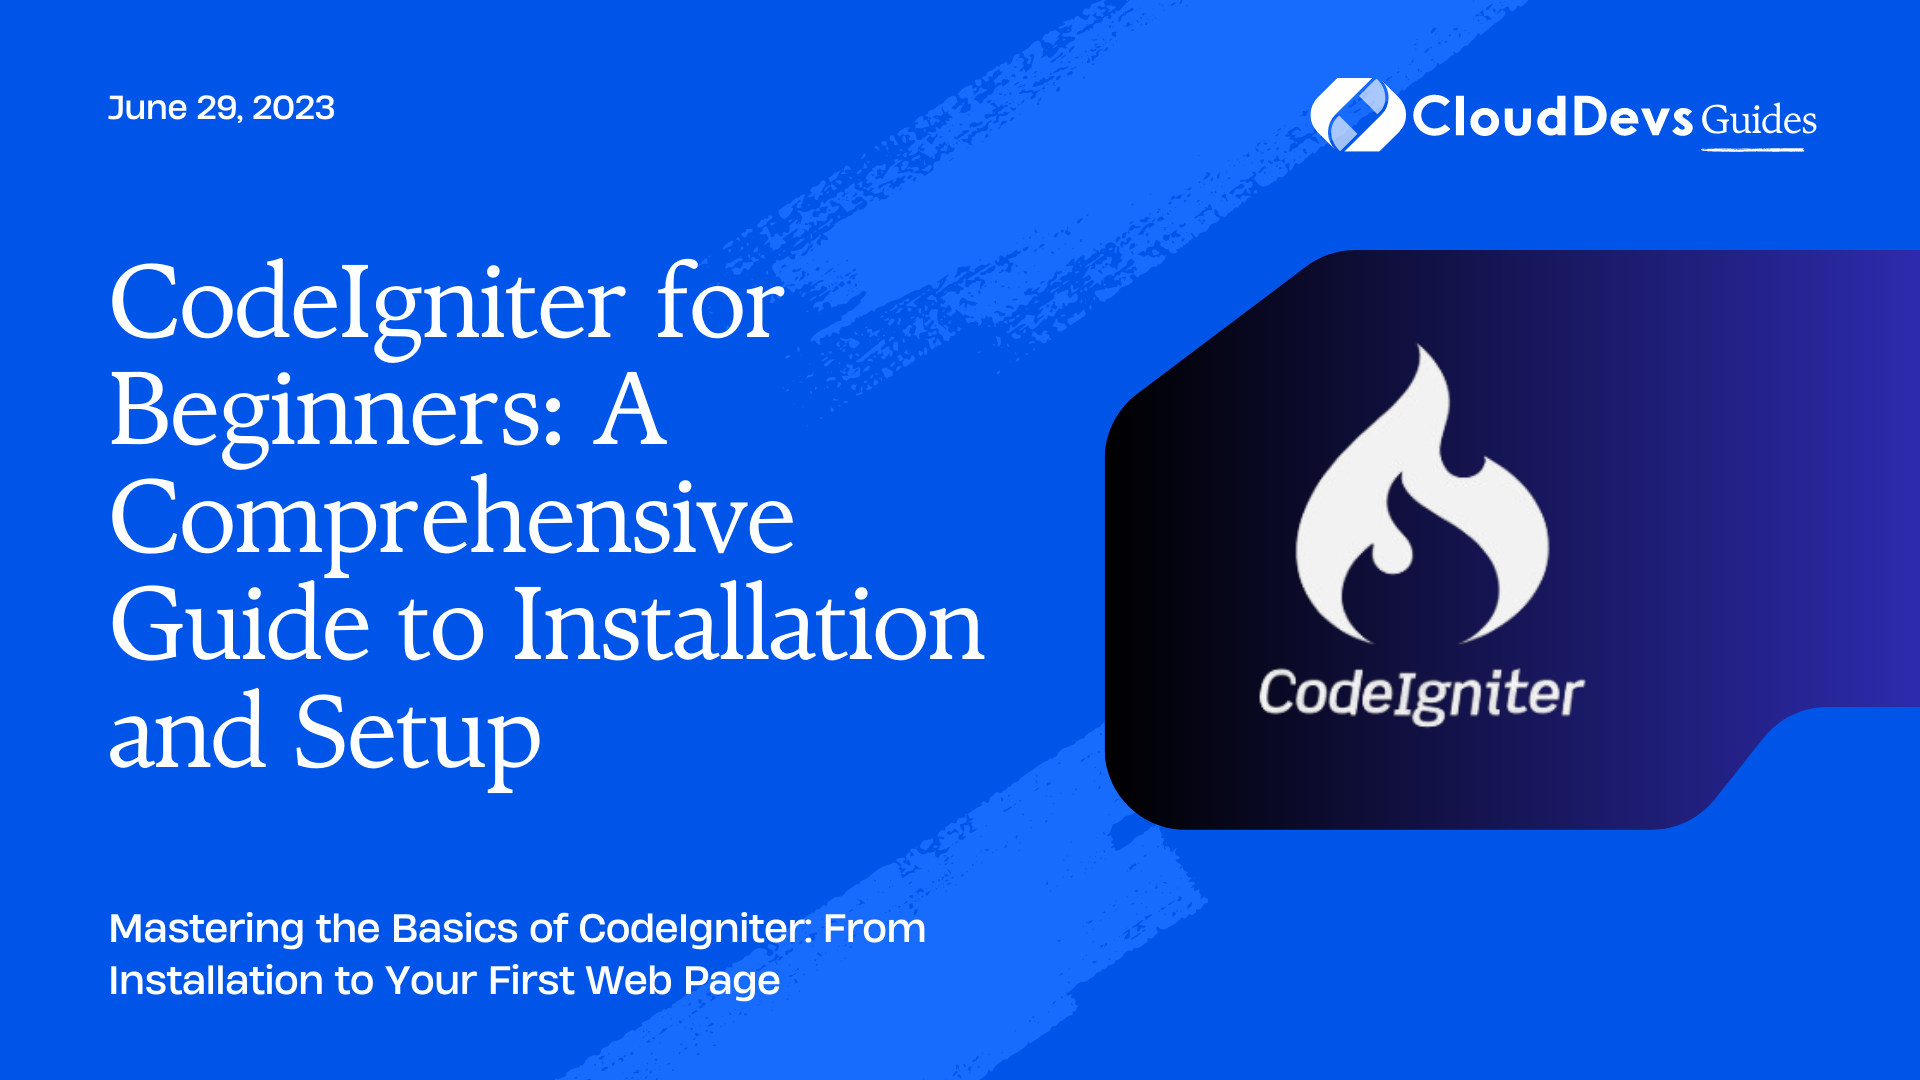 CodeIgniter for Beginners: A Comprehensive Guide to Installation and Setup